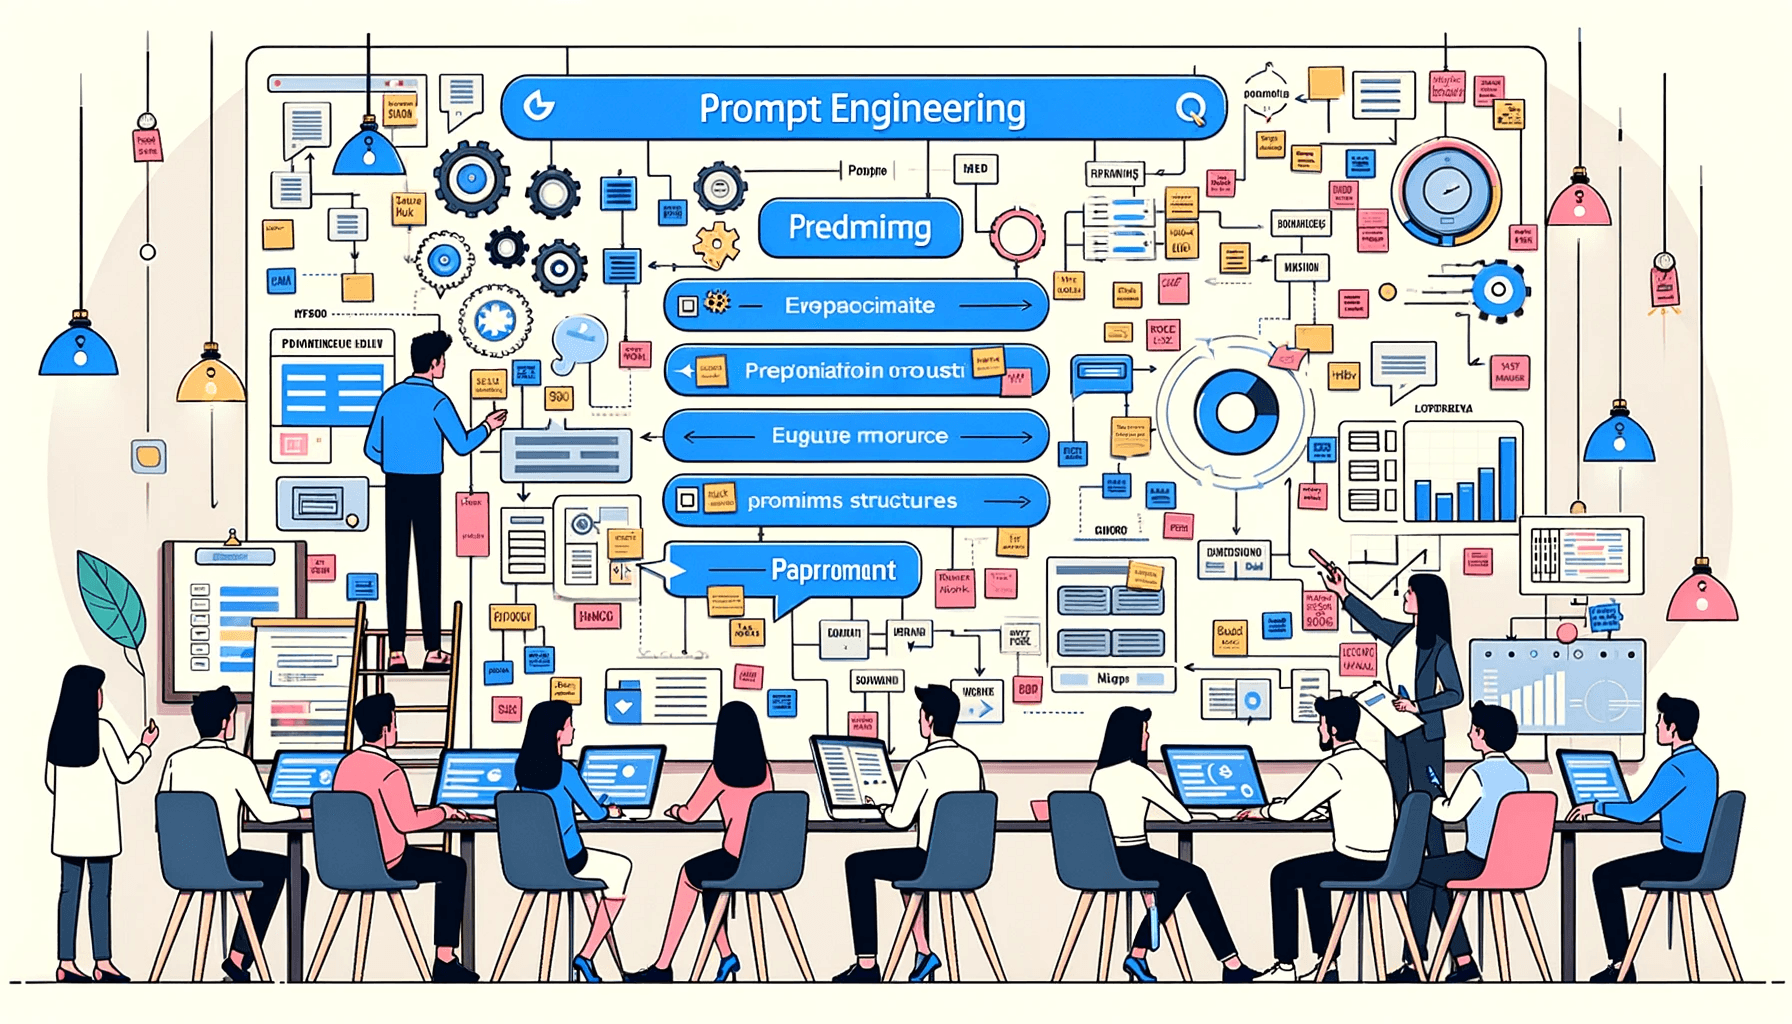 Illustration of a creative workspace dedicated to prompt engineering in a 16:9 aspect ratio. The room is filled with whiteboards covered in flowcharts, diagrams, and sticky notes. In the middle, a group of diverse professionals, both men and women of diff